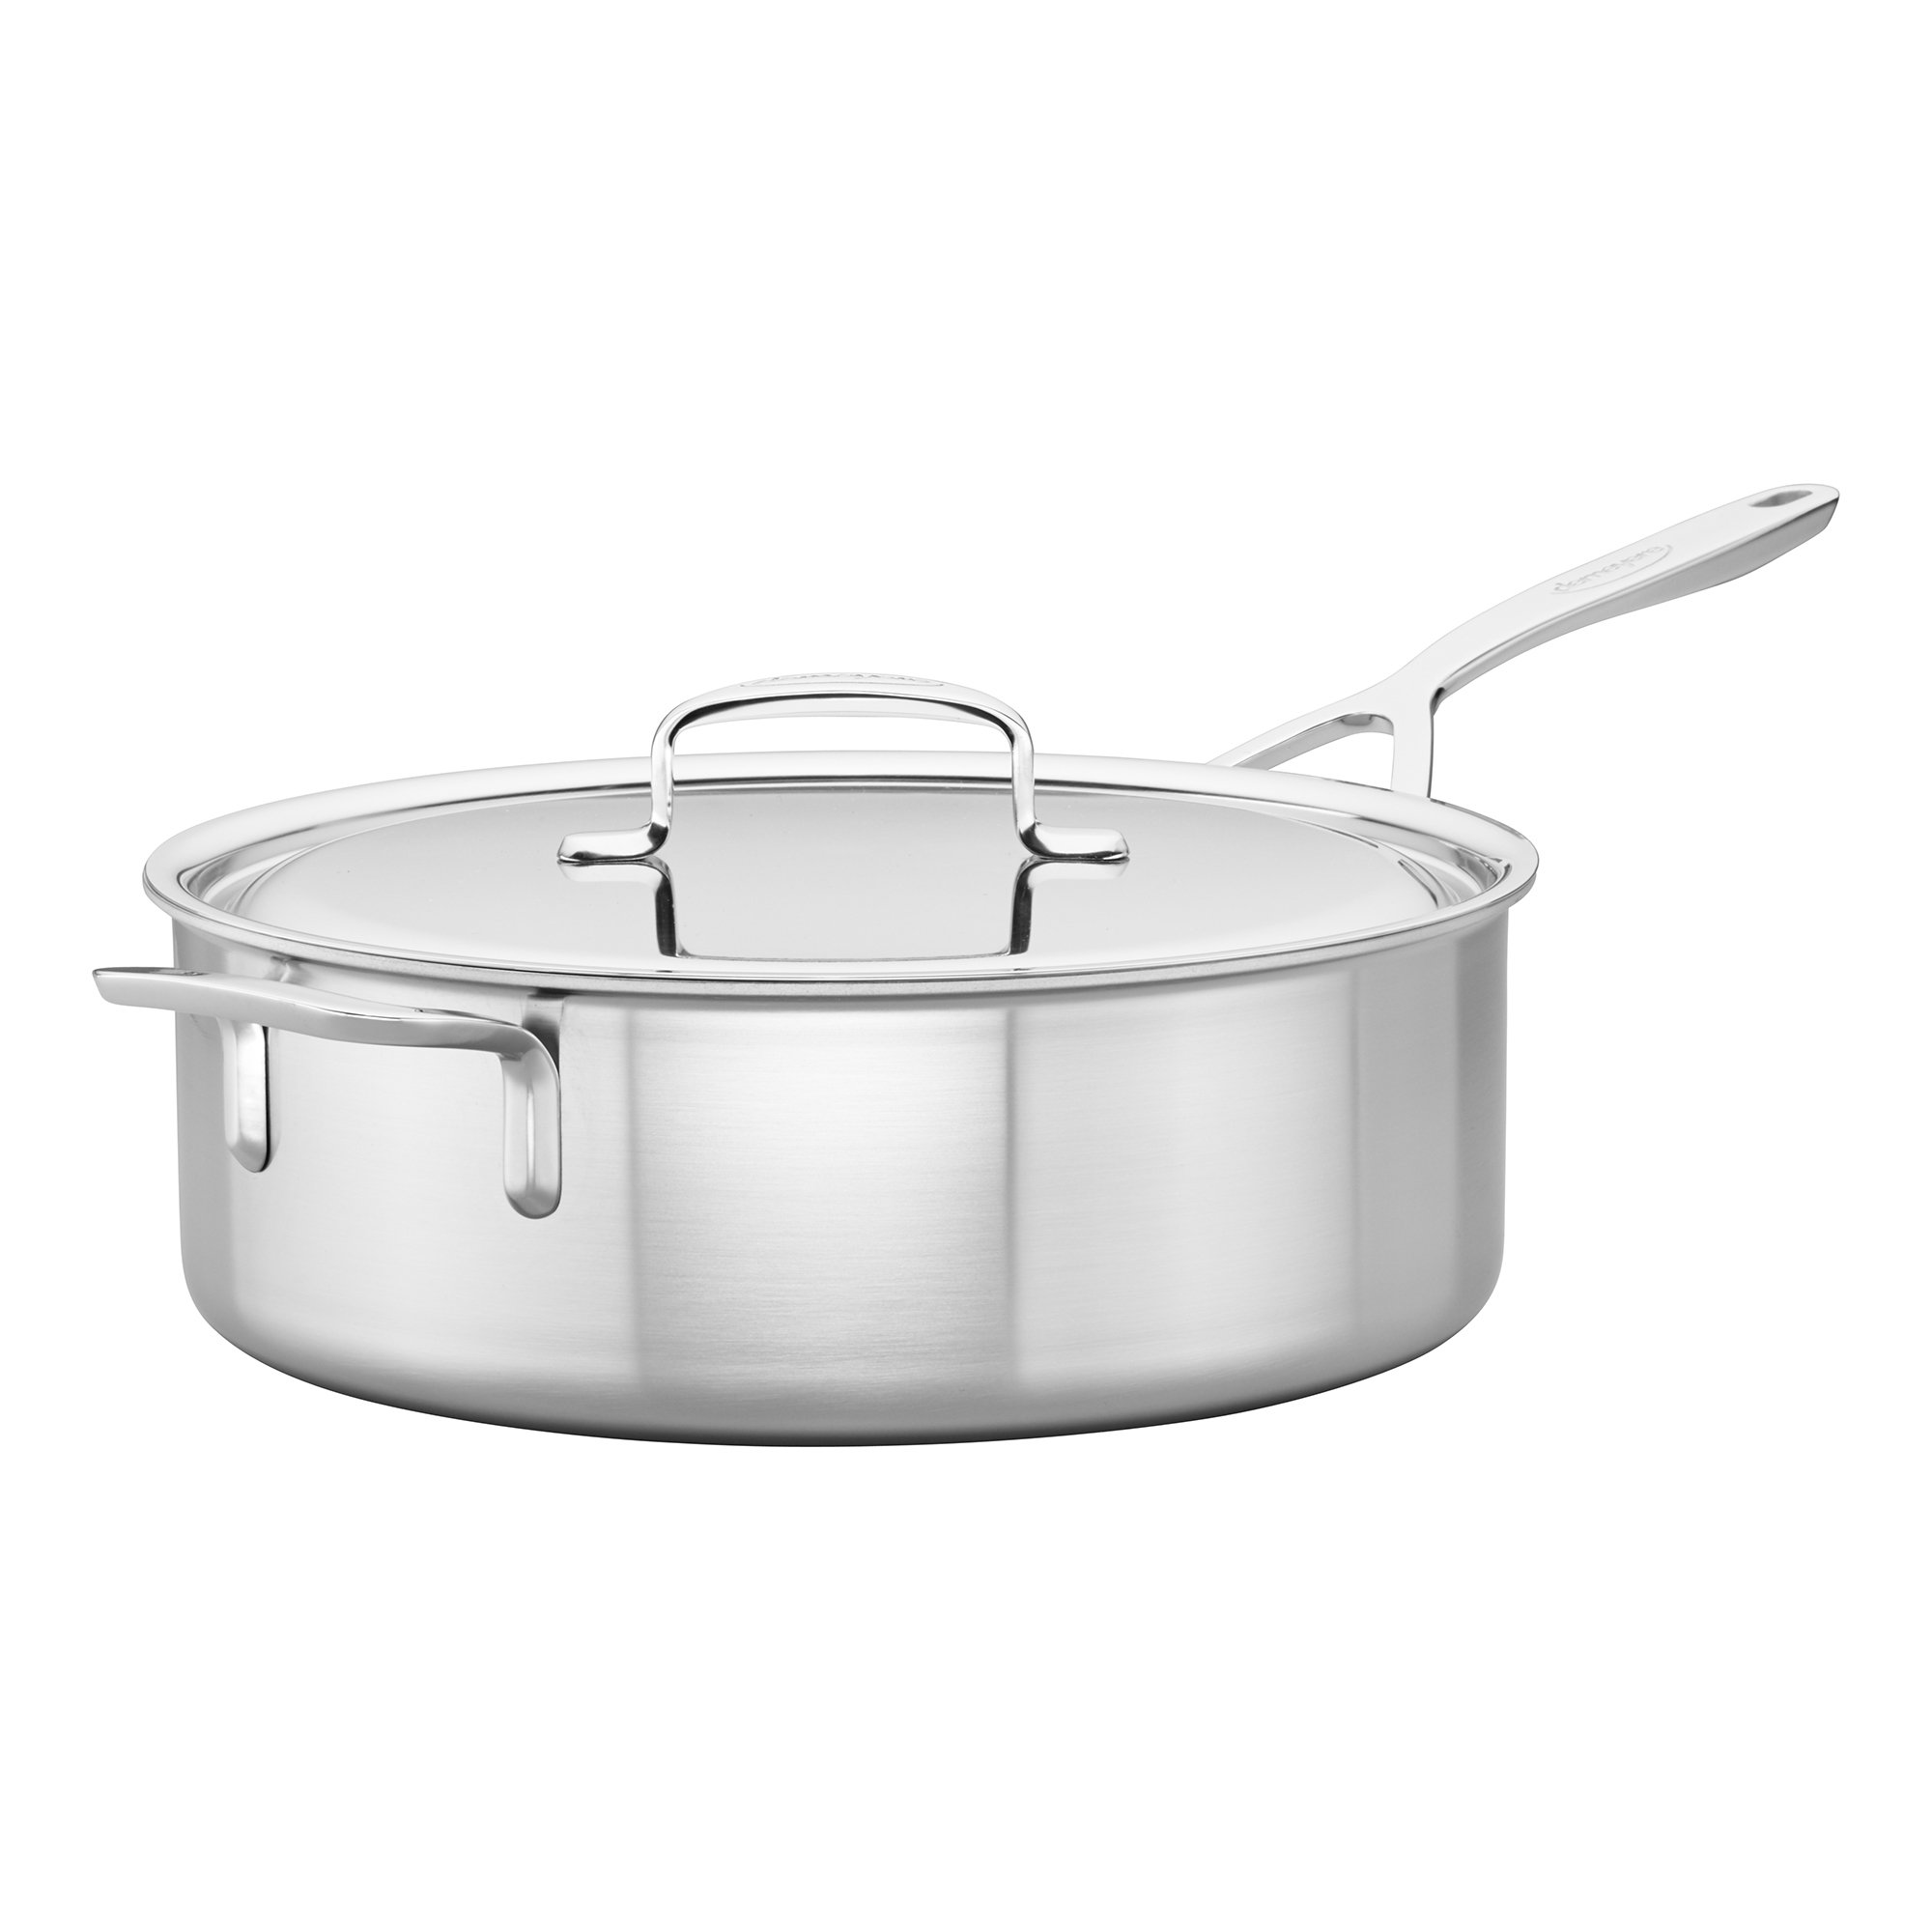 Demeyere 5-Plus Stainless Steel 6.5-qt Saute Pan with Helper Handle